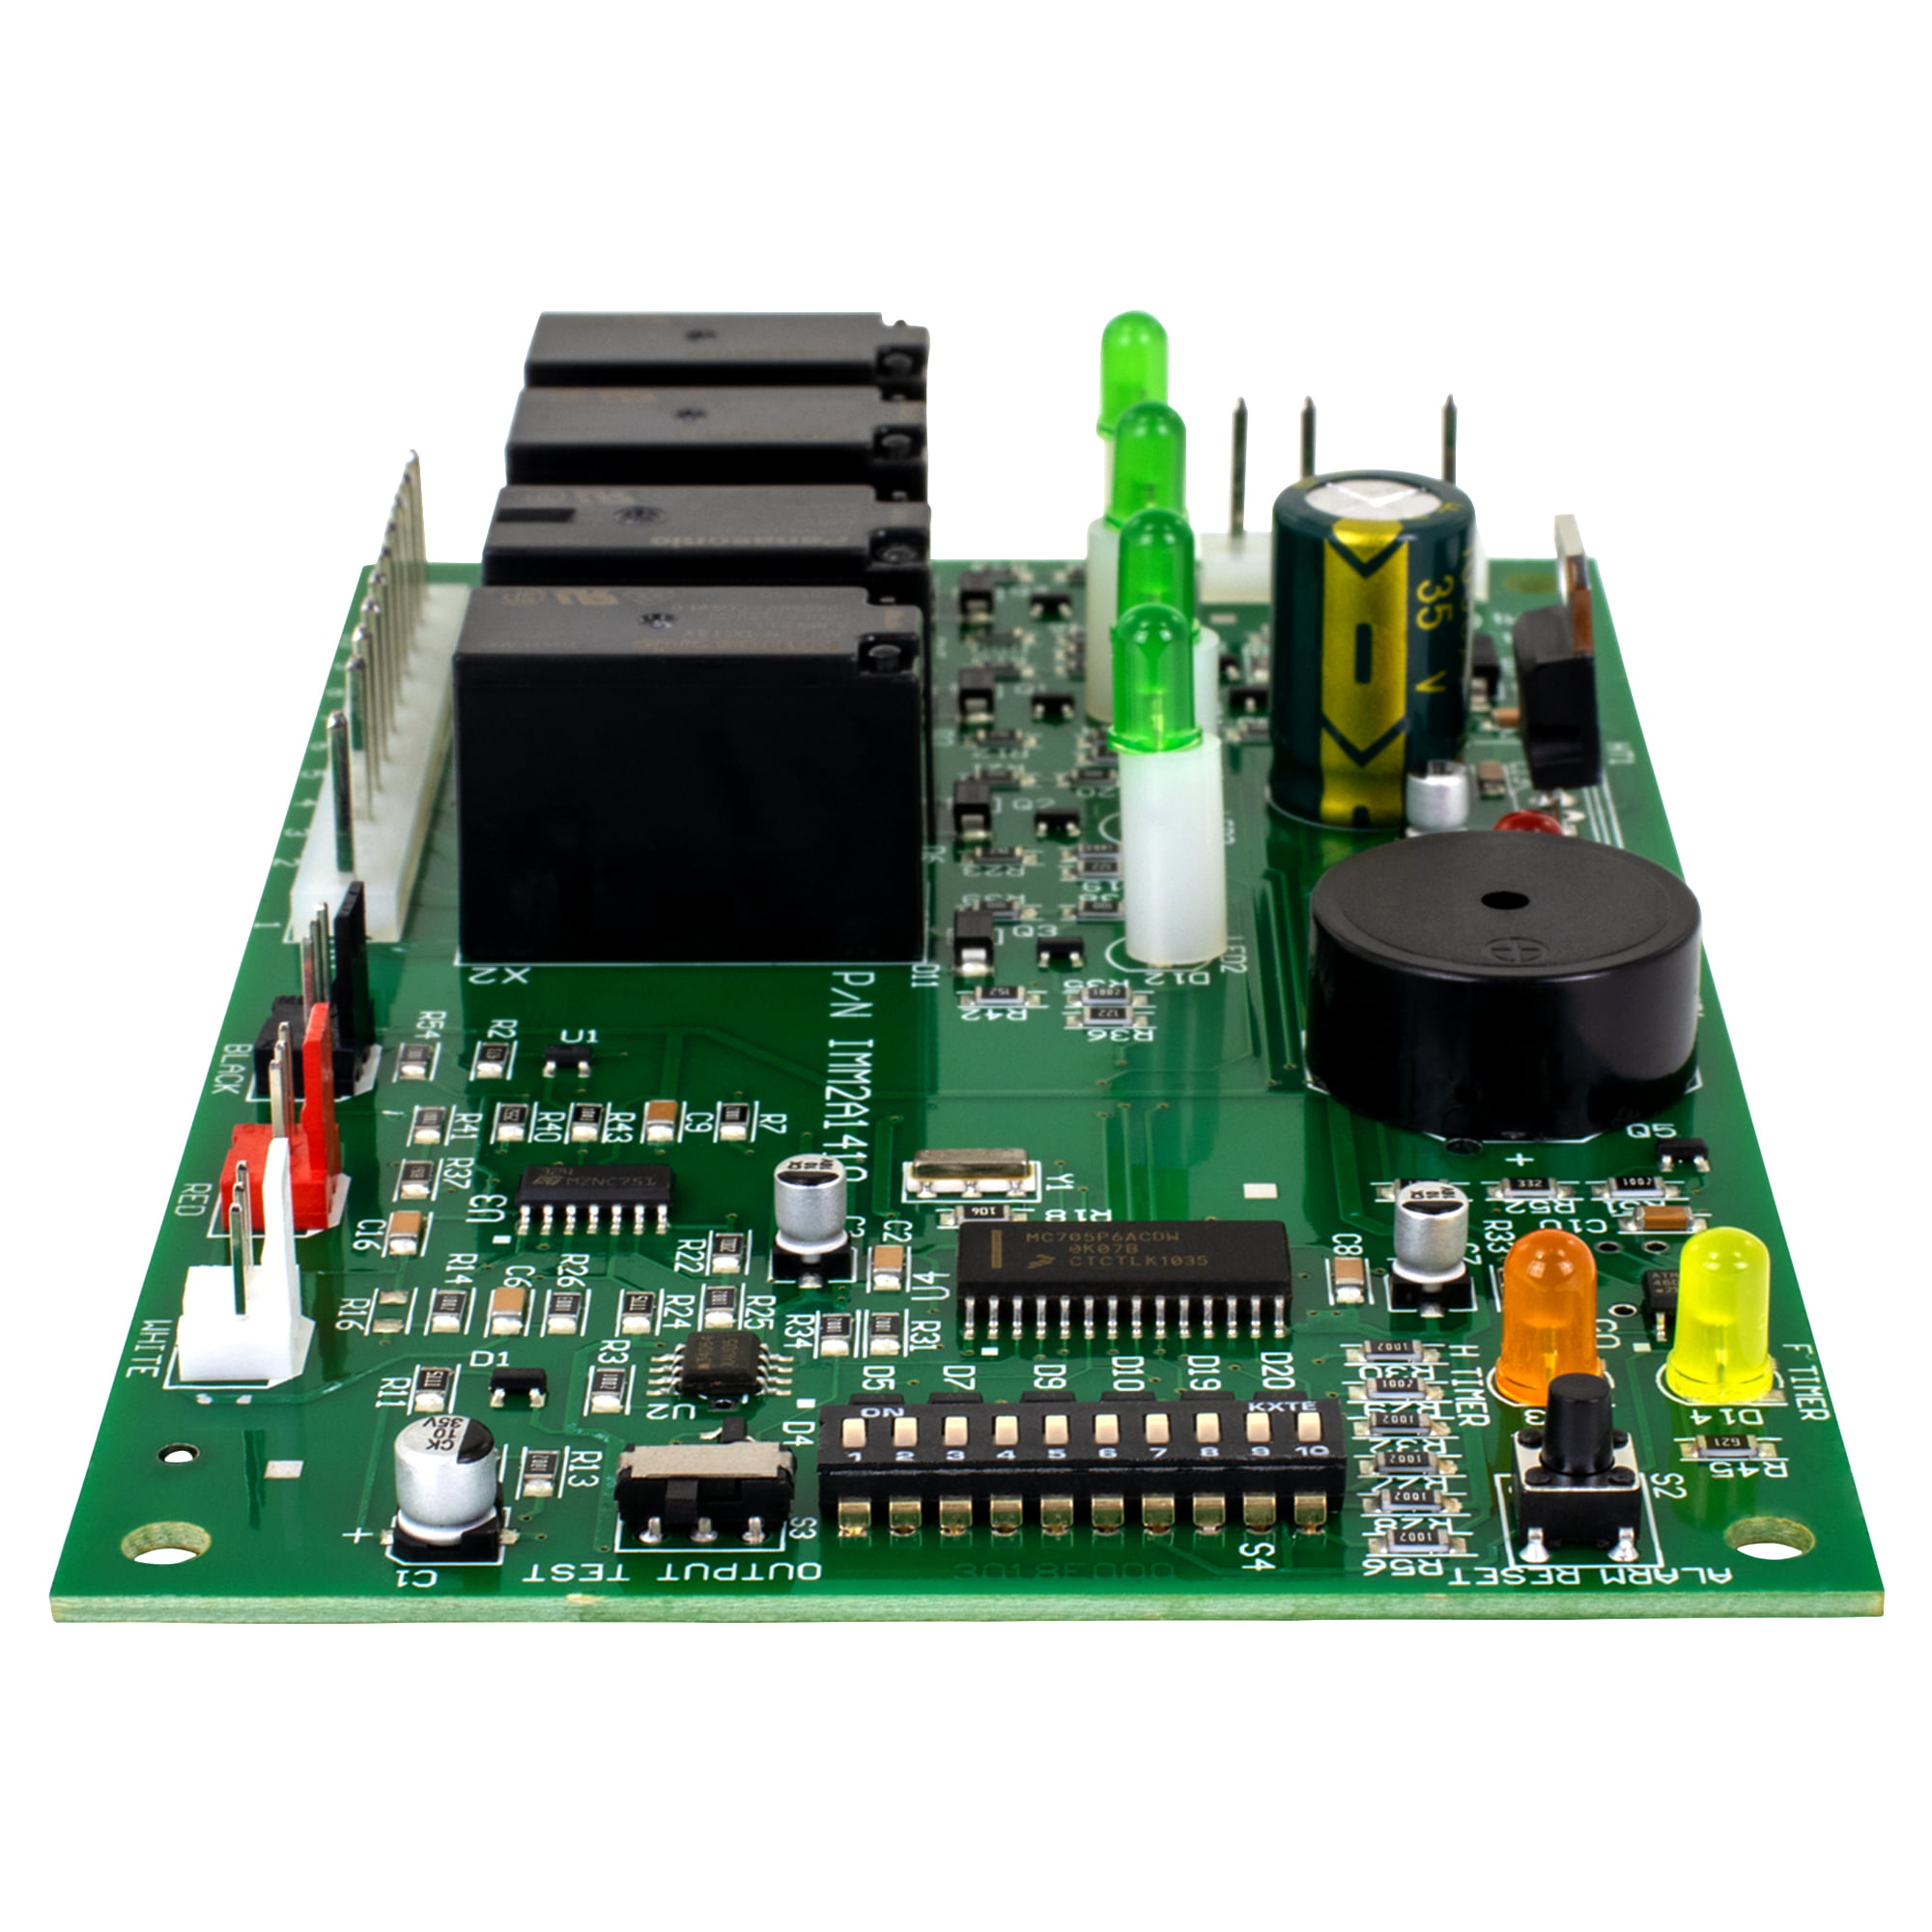 IMM Control Board Replacement for Hoshizaki Ice Machine Fits 2A1410-01  2A1410-02